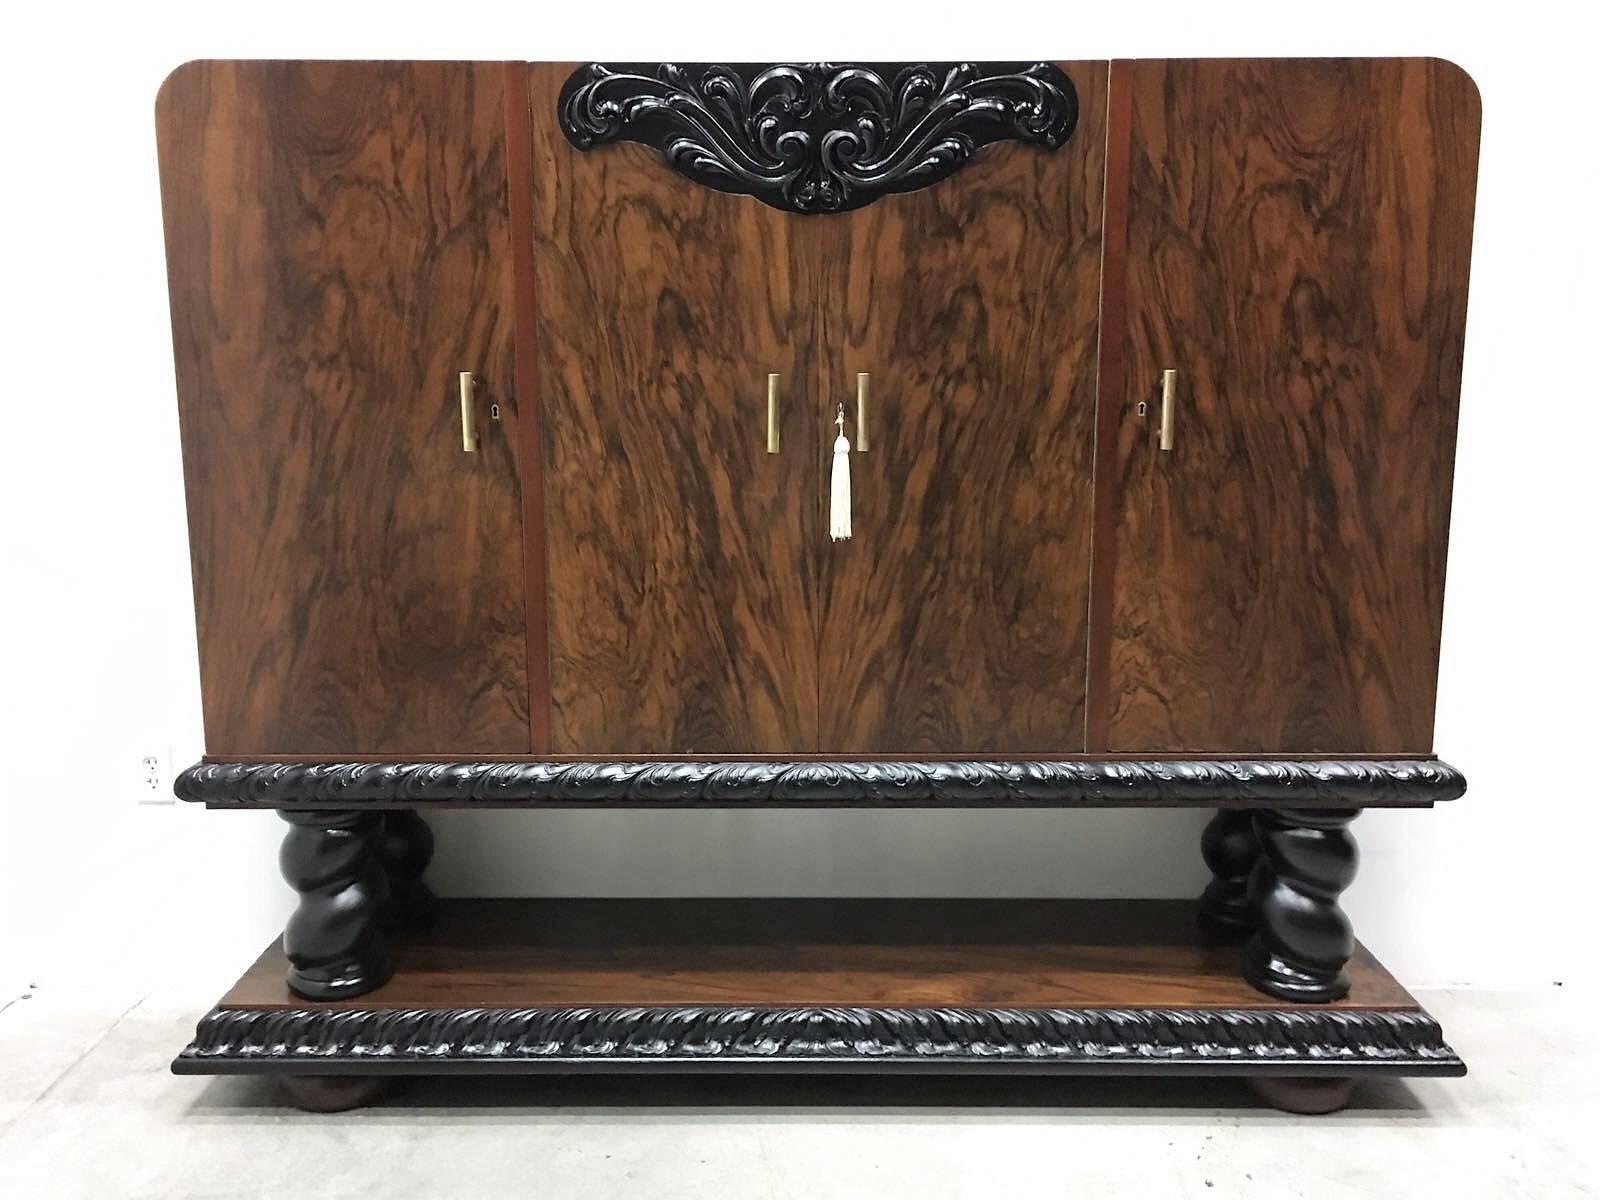 Rare and important beautiful natched Art Decó storage cabinet / bookcase.
It's made in walnut root and mahogany inside lemon glass.
Lovely hand-turned barley twist and turned legs.